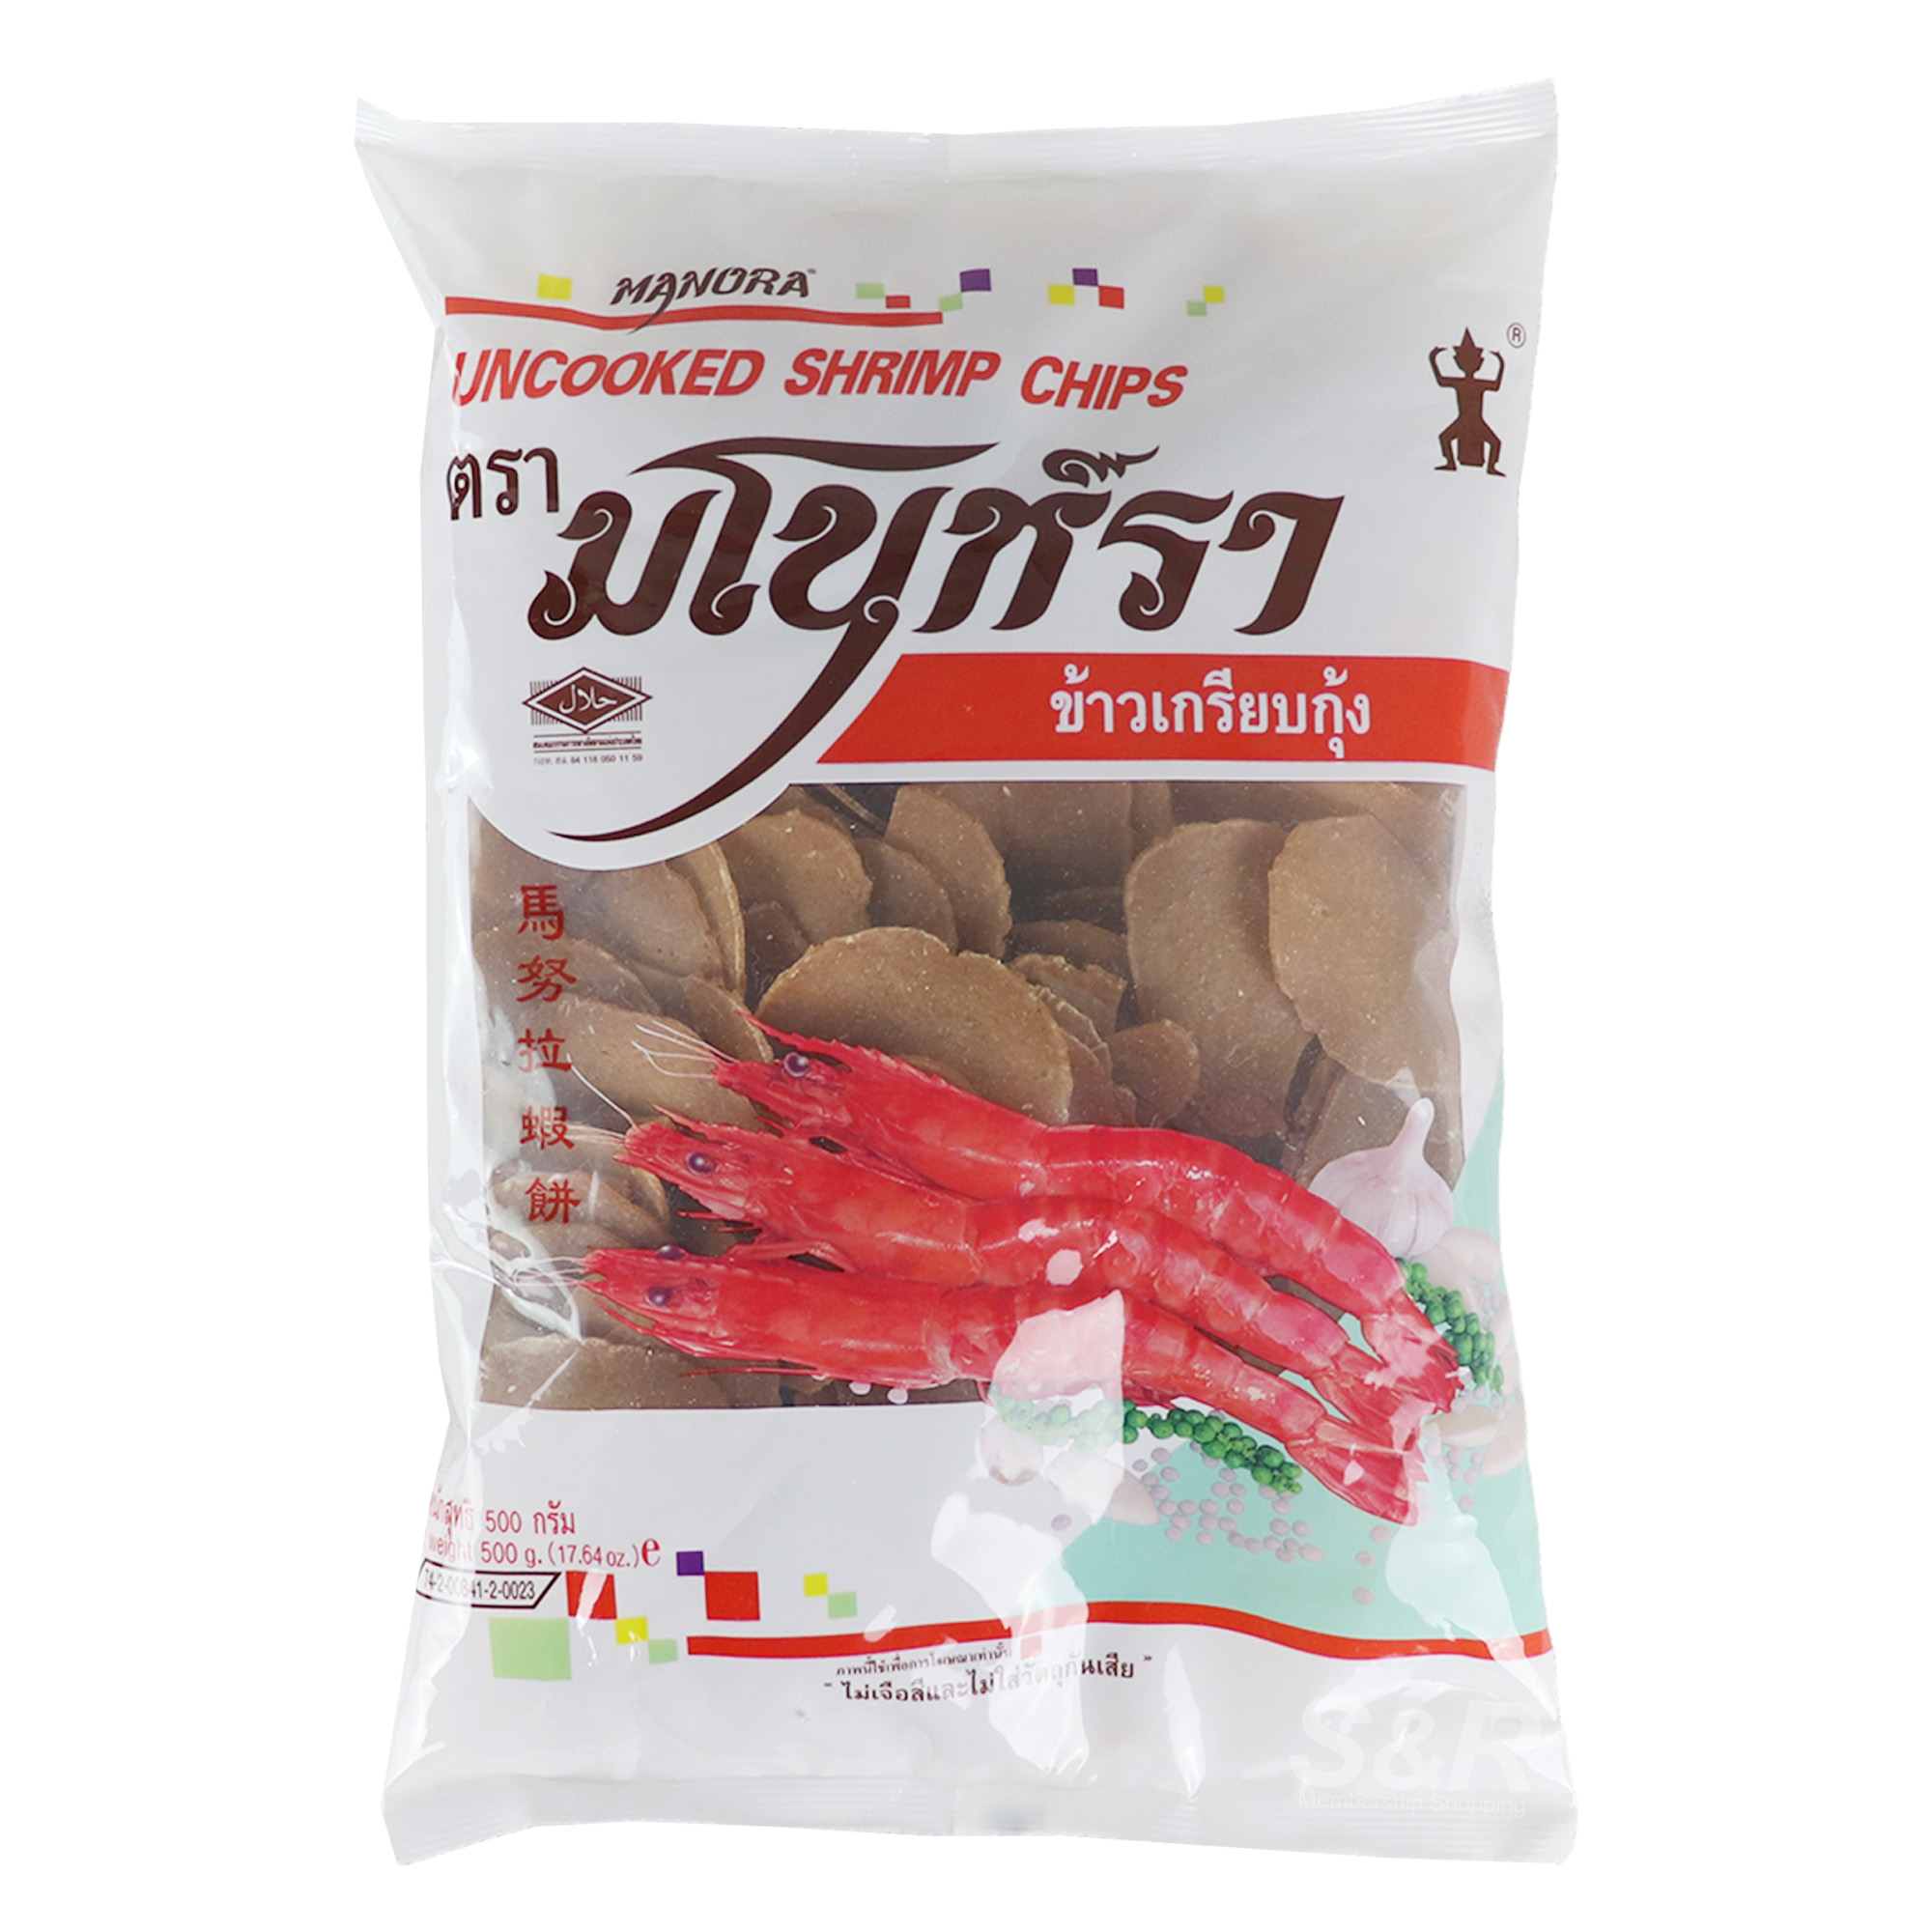 Manora Uncooked Shrimp Chips 500g